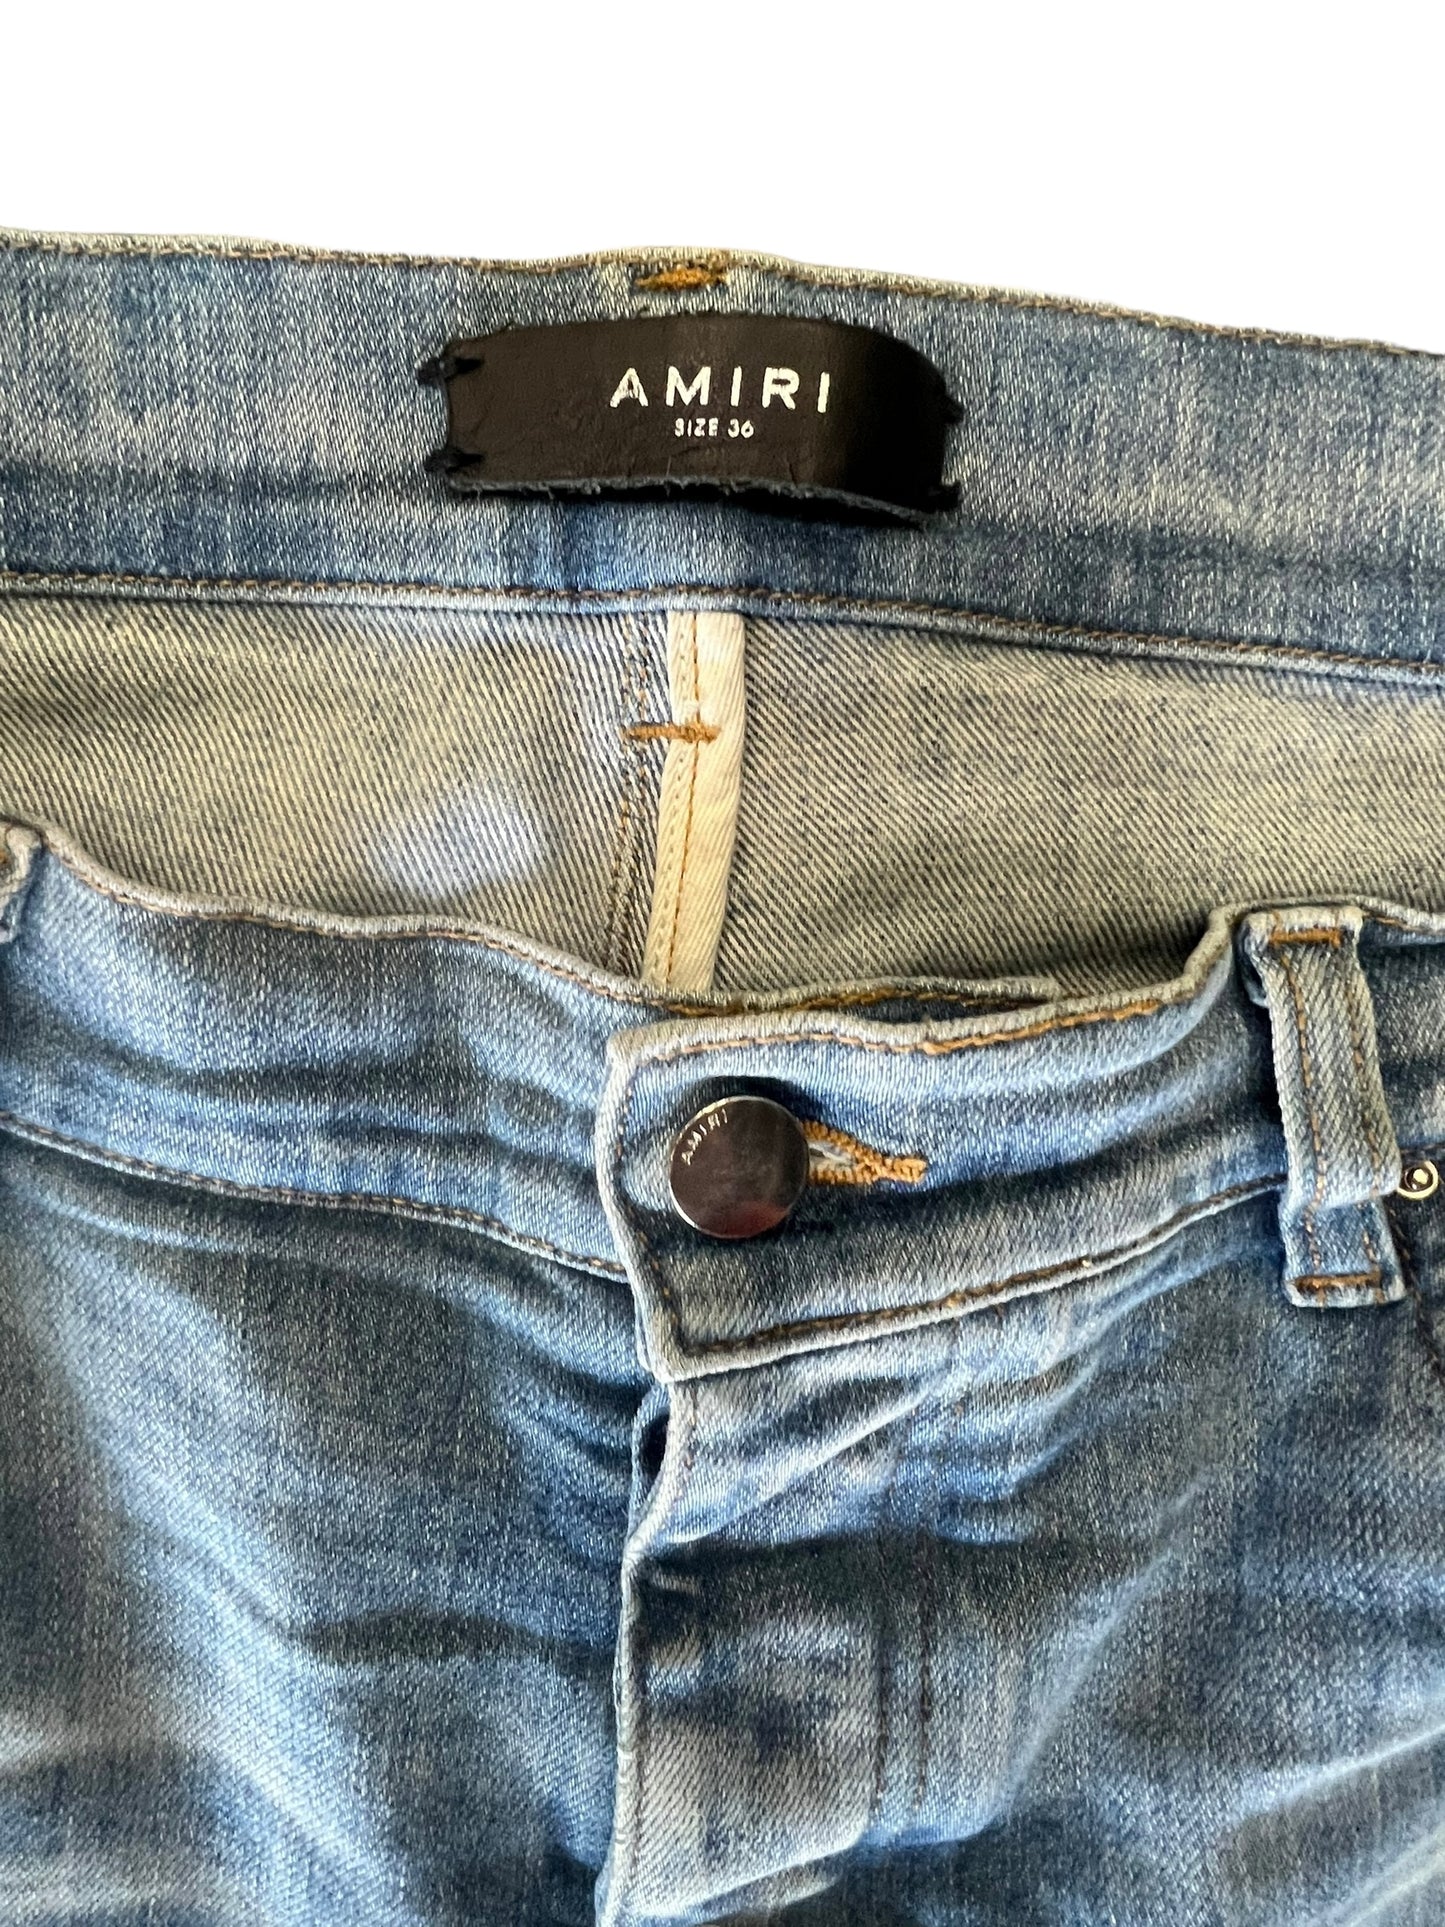 Amiri MX1 blue and black size 36 pre-owned